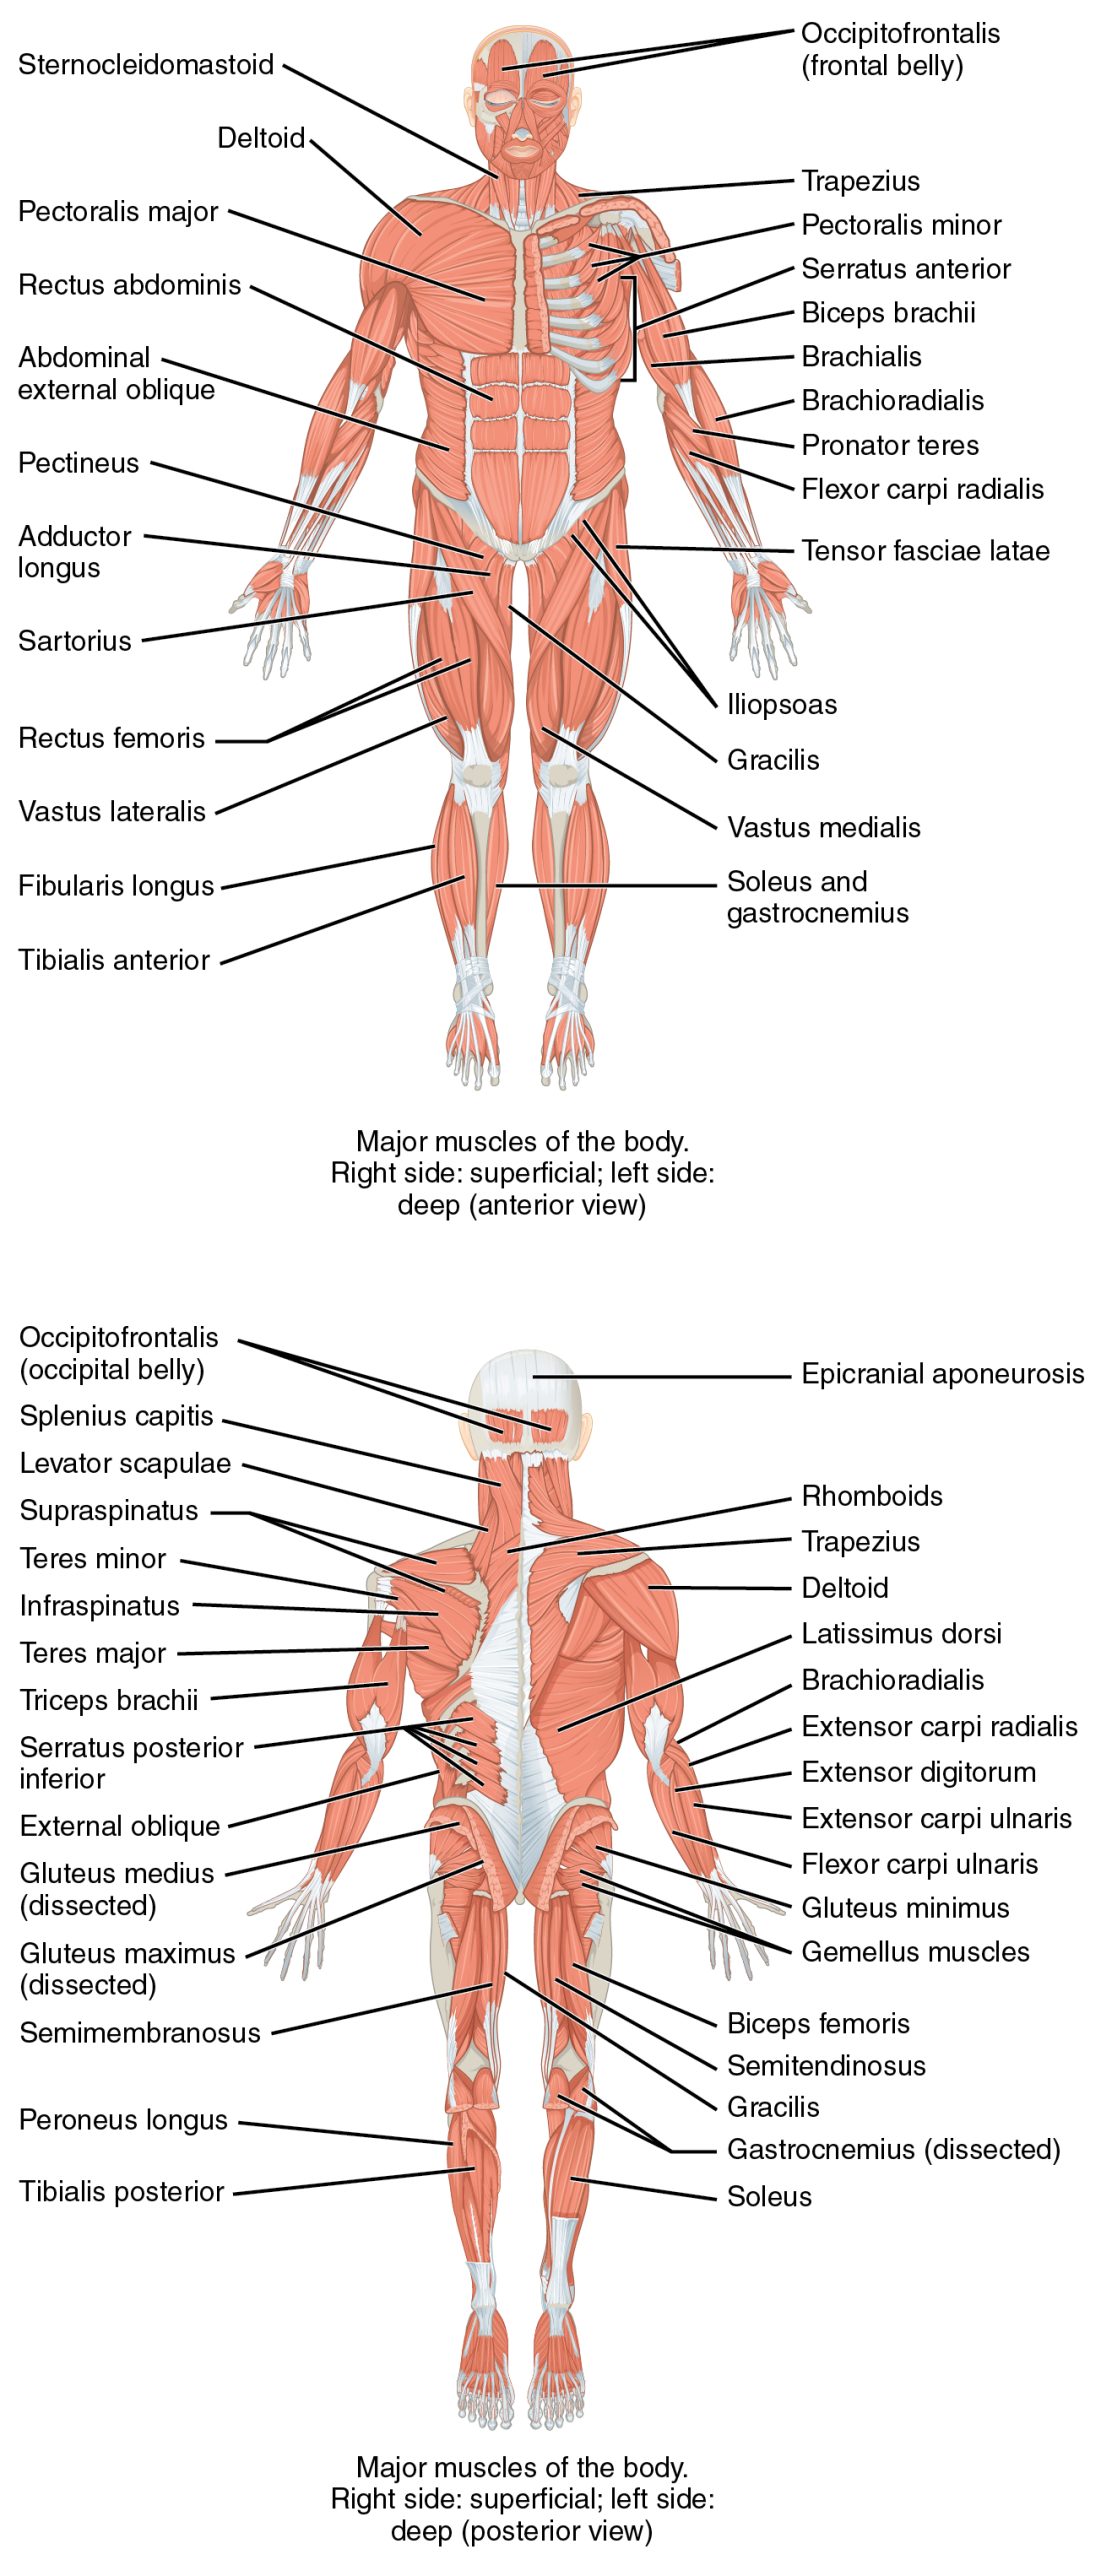 Illustration of muscular system with labels for major parts